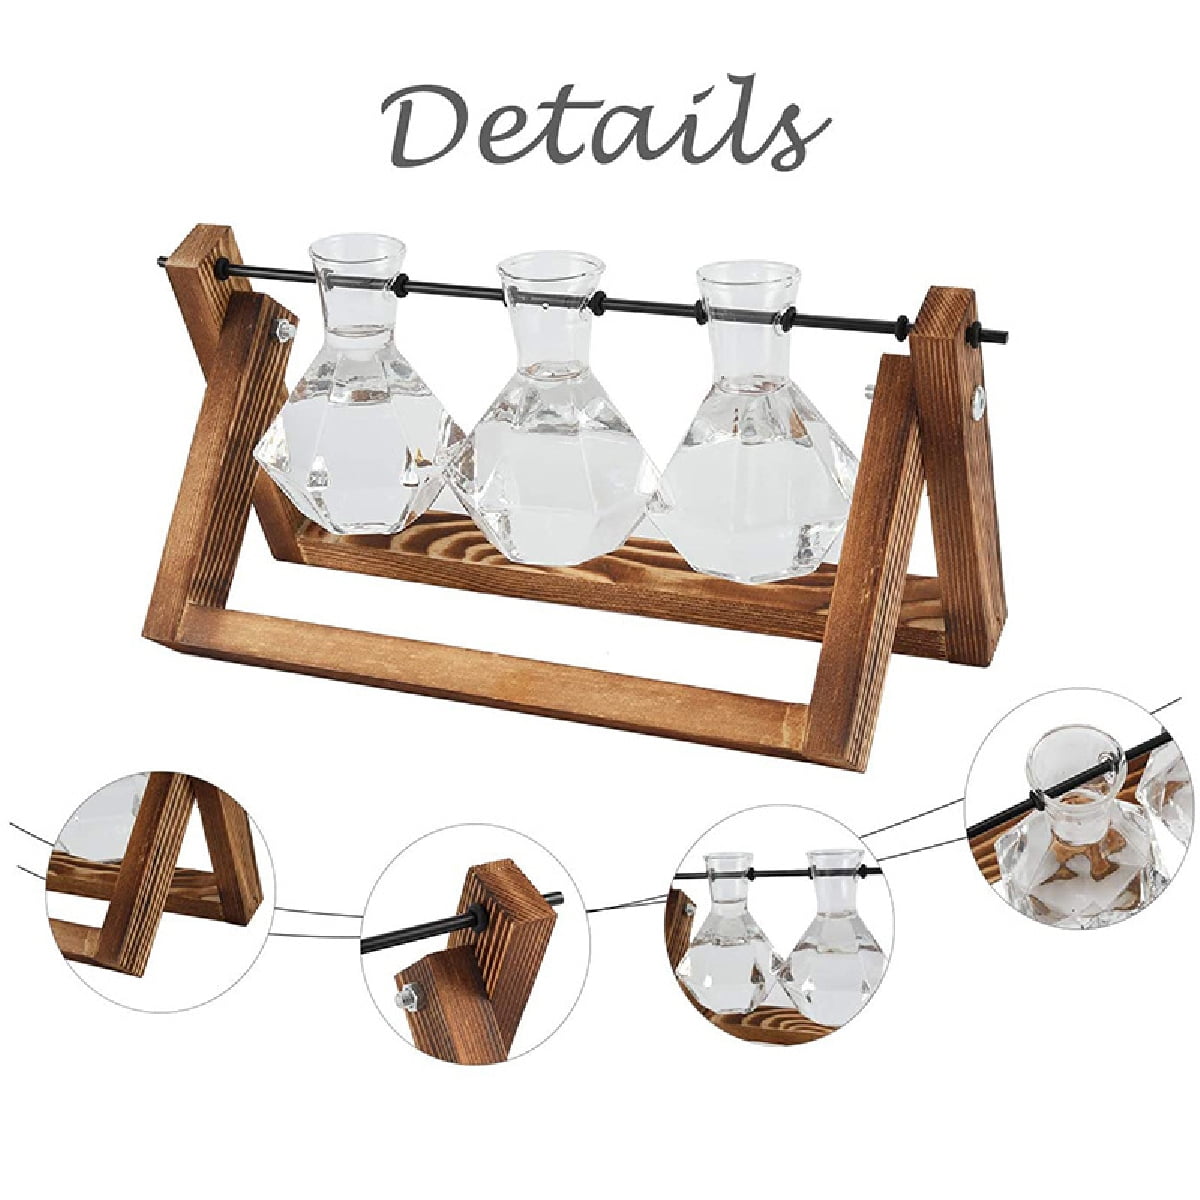 Details about   Wooden Plant Terrariums Kit Hydroponics Air Planter Holder with 3 Diamond Glass 